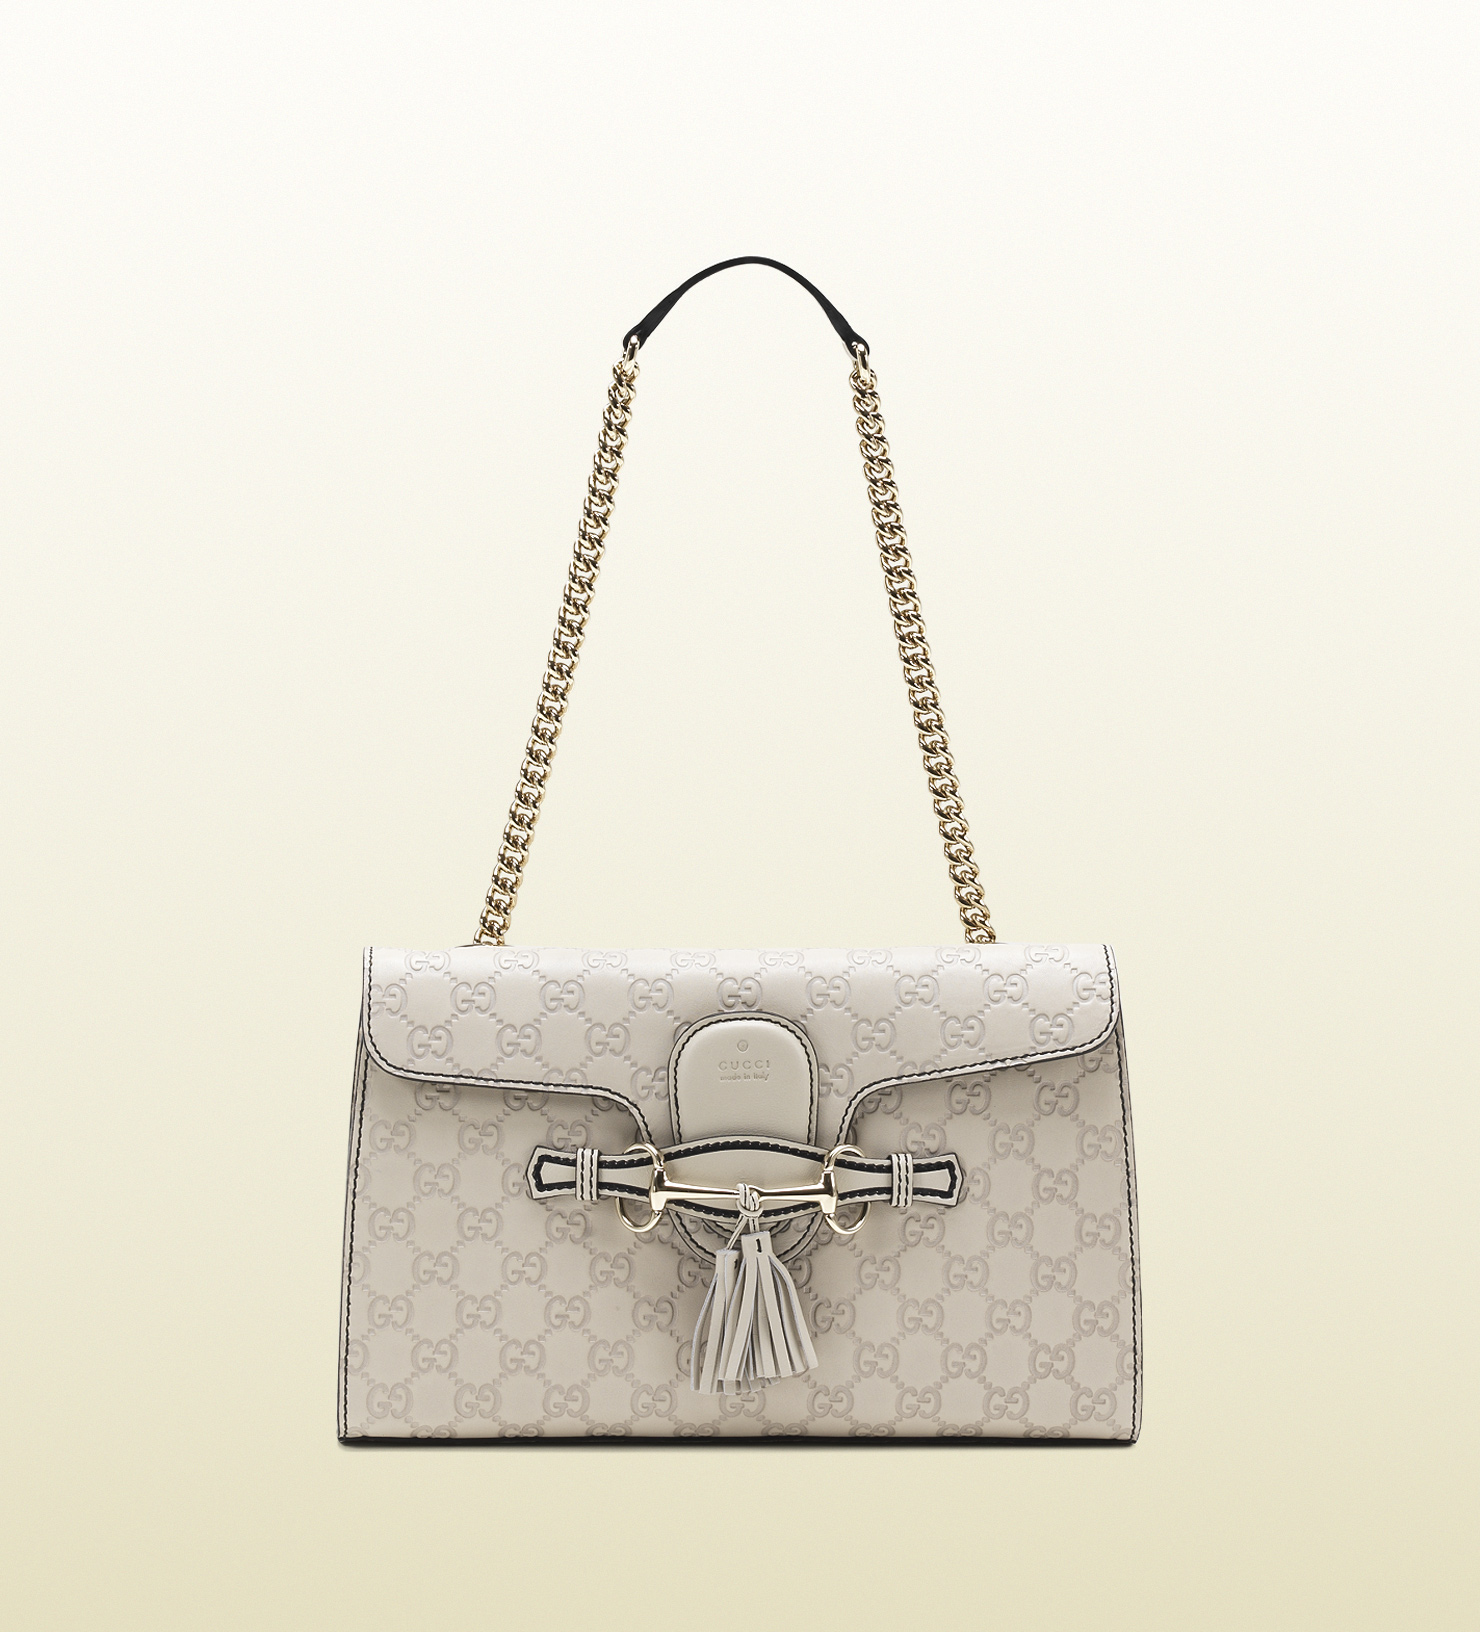 Gucci Emily Guccissima Leather Chain Shoulder Bag in Beige (white) | Lyst